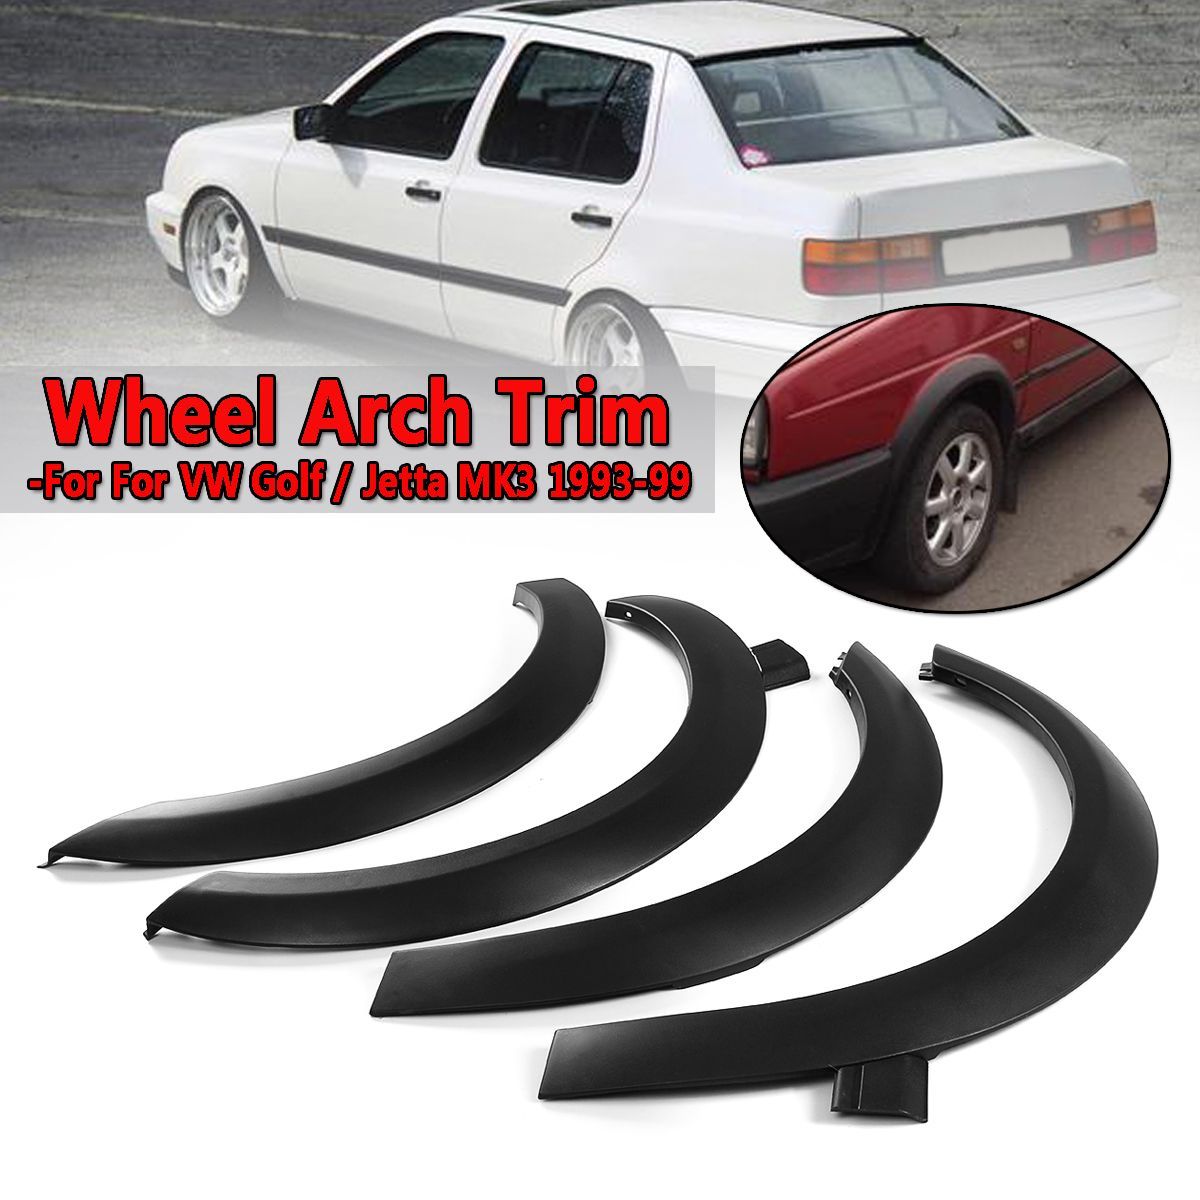 4PCS-Front-Rear-Fender-Flares-Wheel-Arches-Protector-For-VW-Golf-Jetta-Cabrio-MK3-1725983